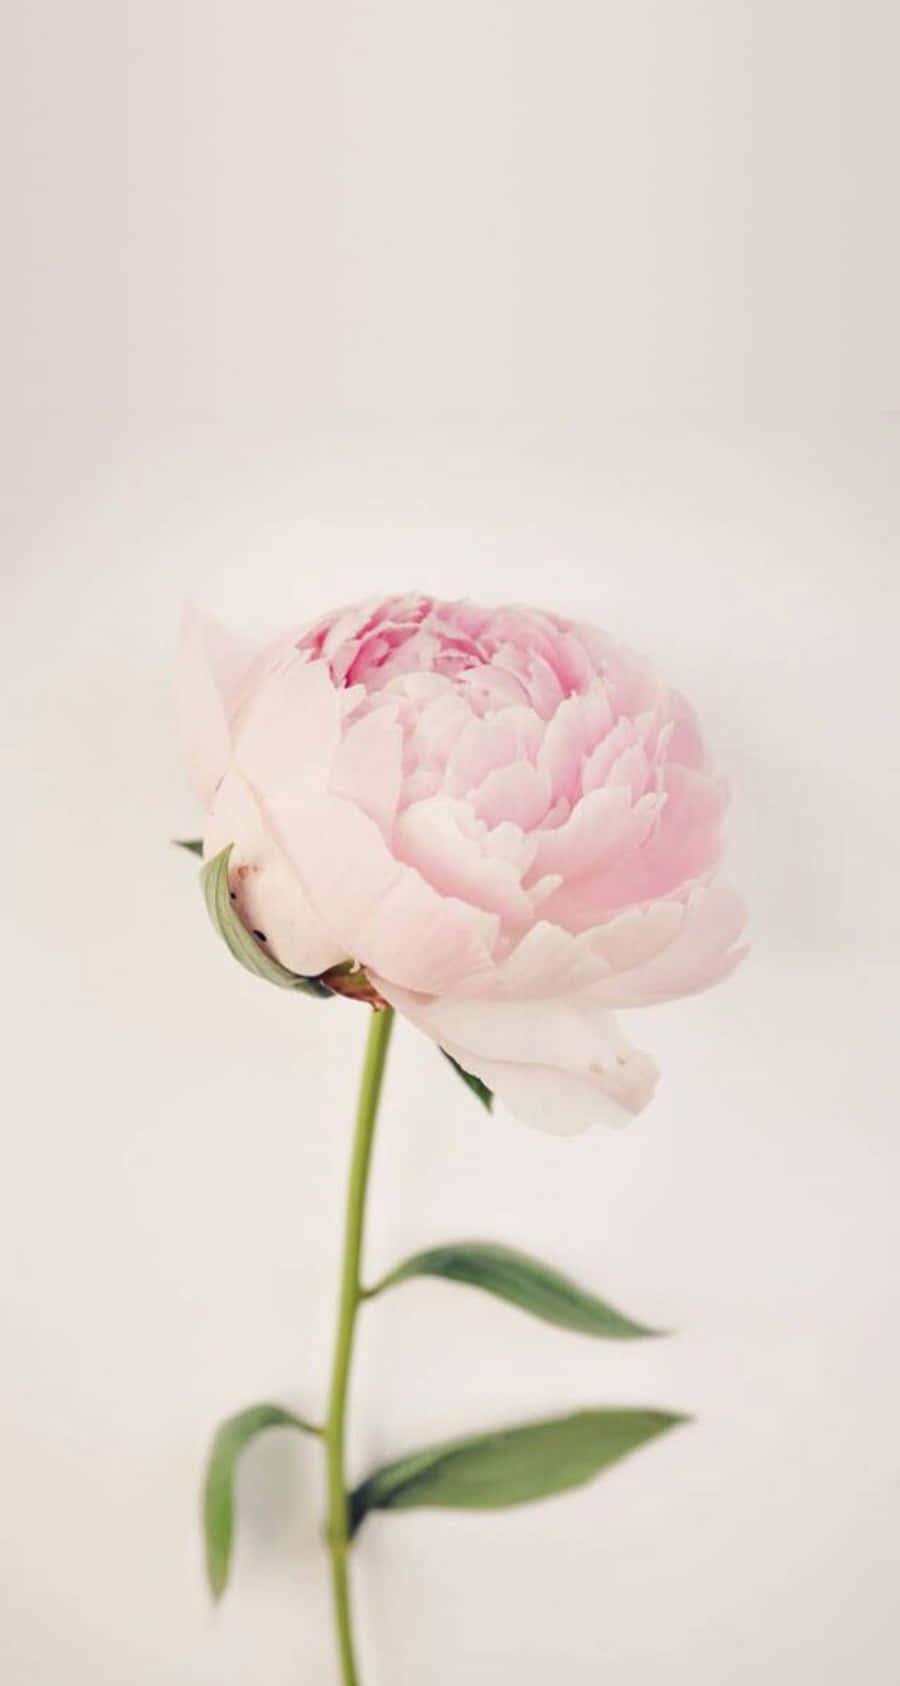 Enjoy the beauty of peony flowers with your Iphone Wallpaper